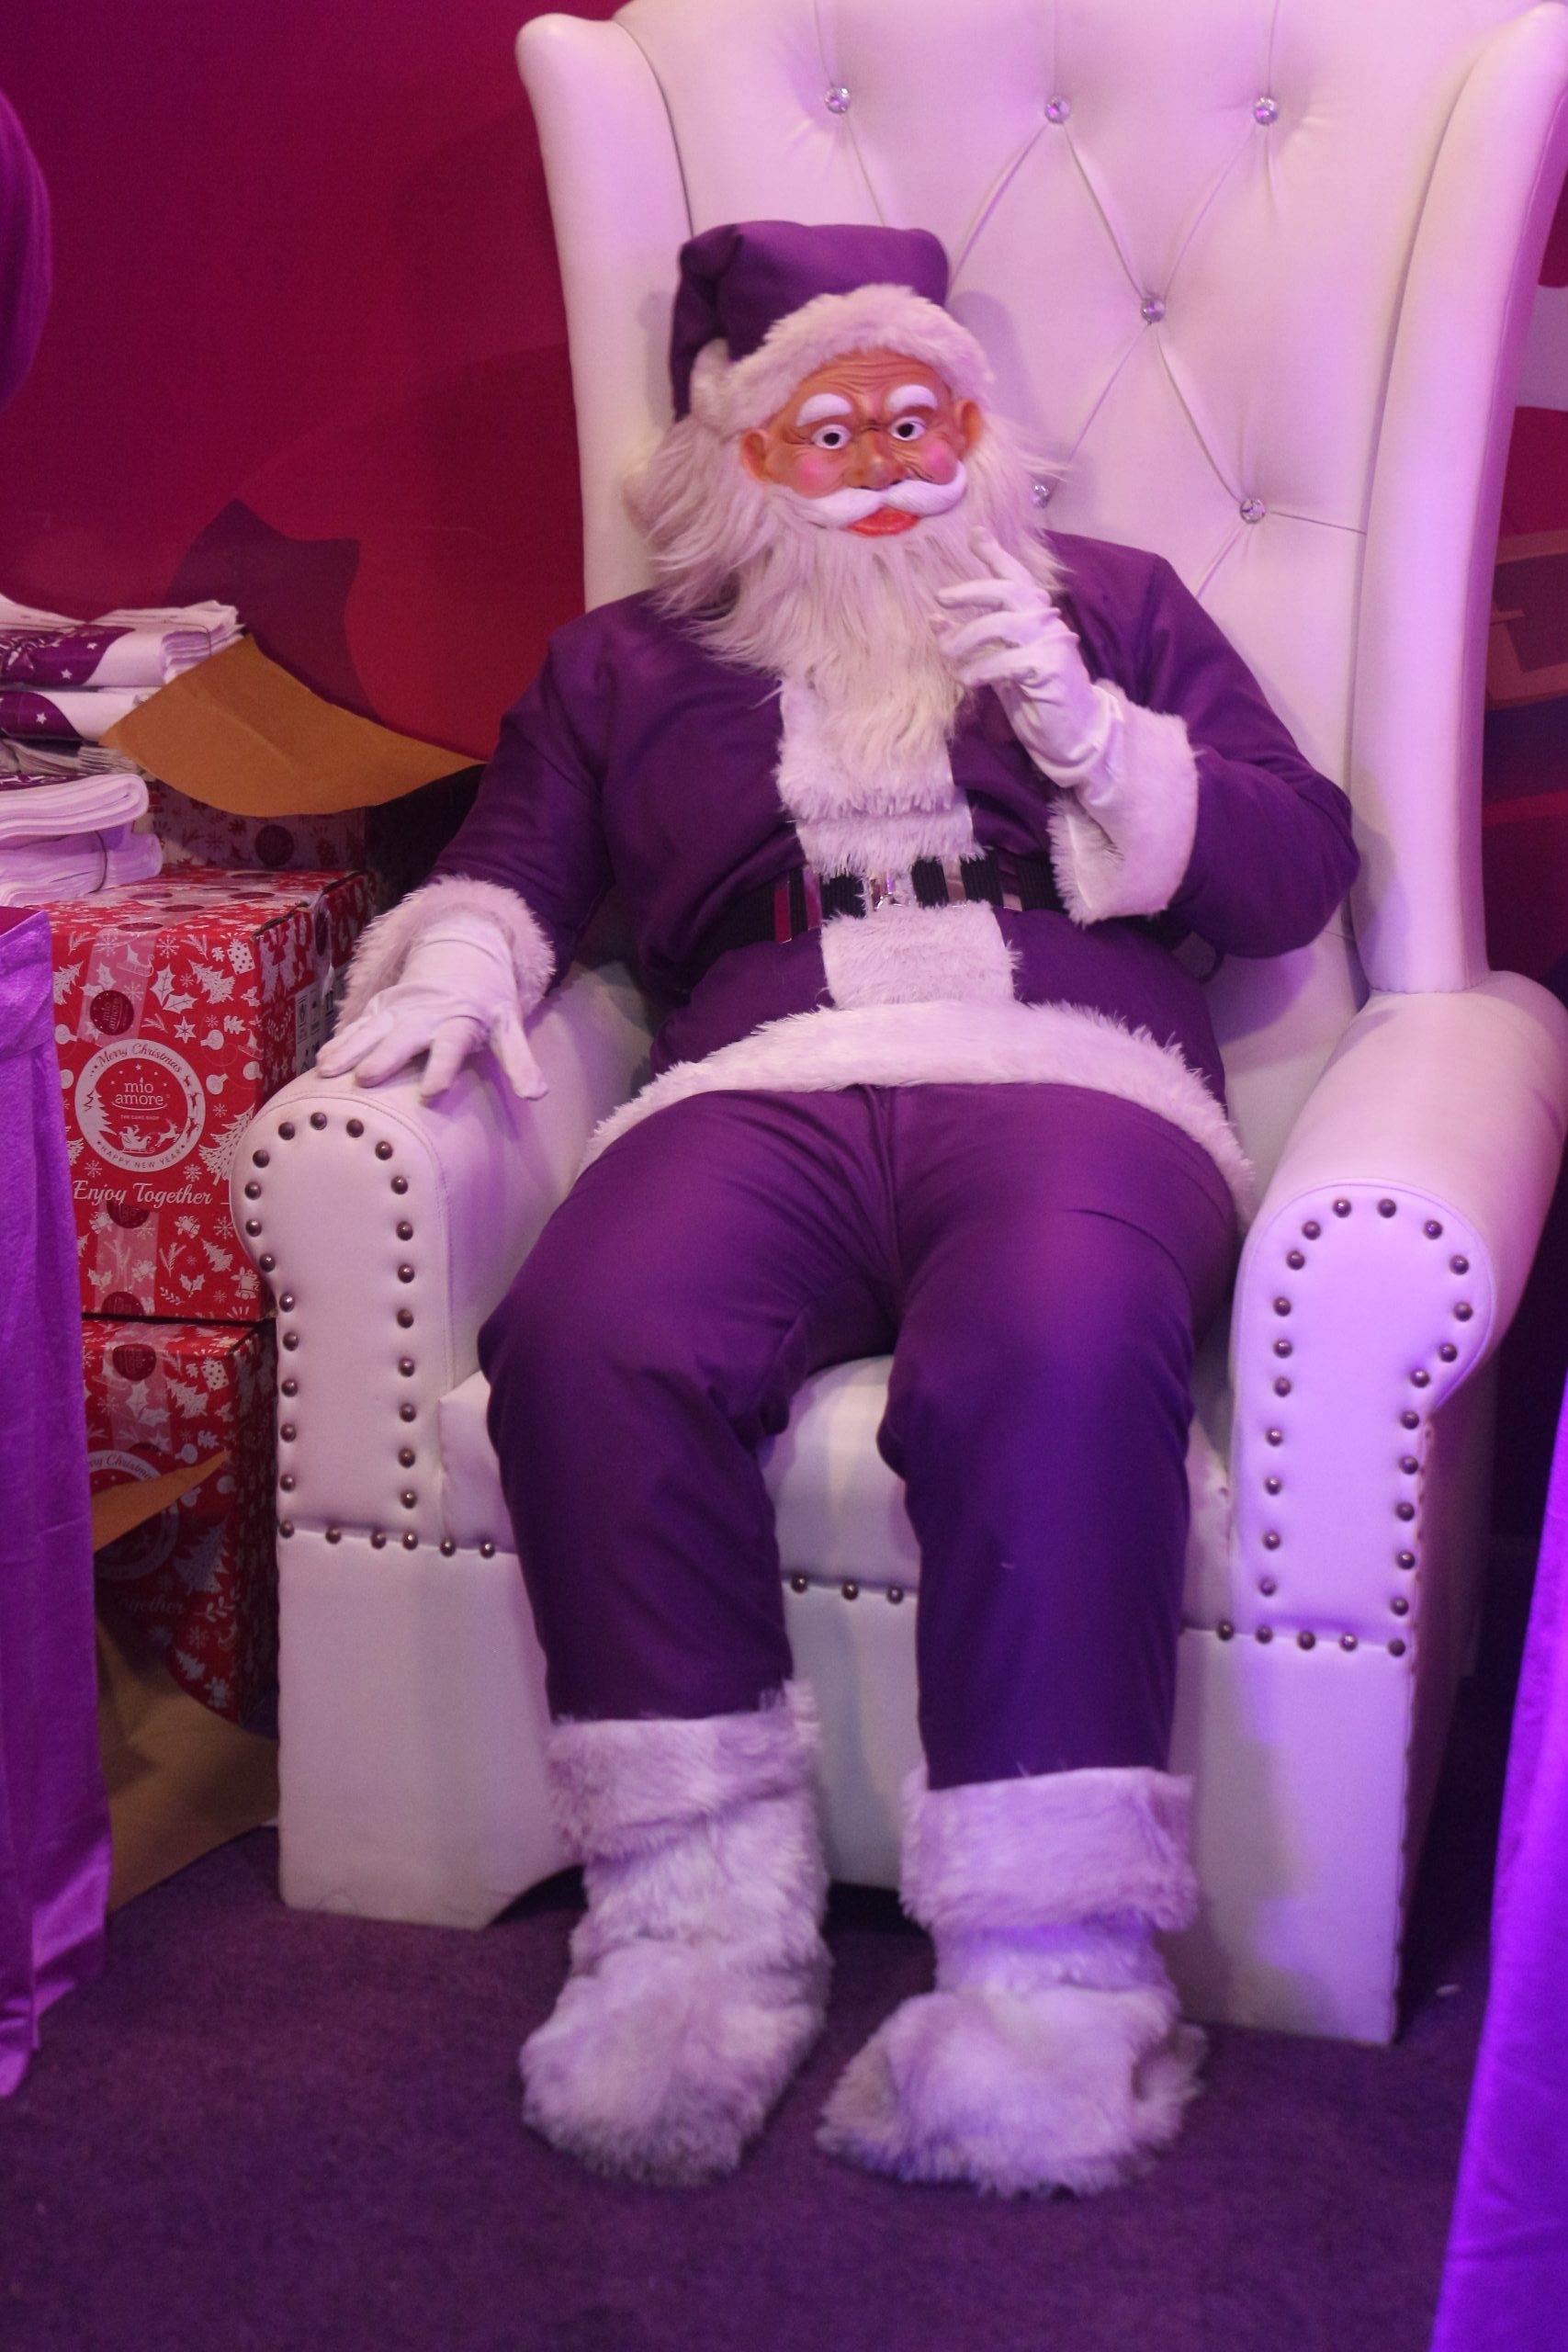 Mio Amore Purple Santa shared joy with people as a part of the Christmas celebration